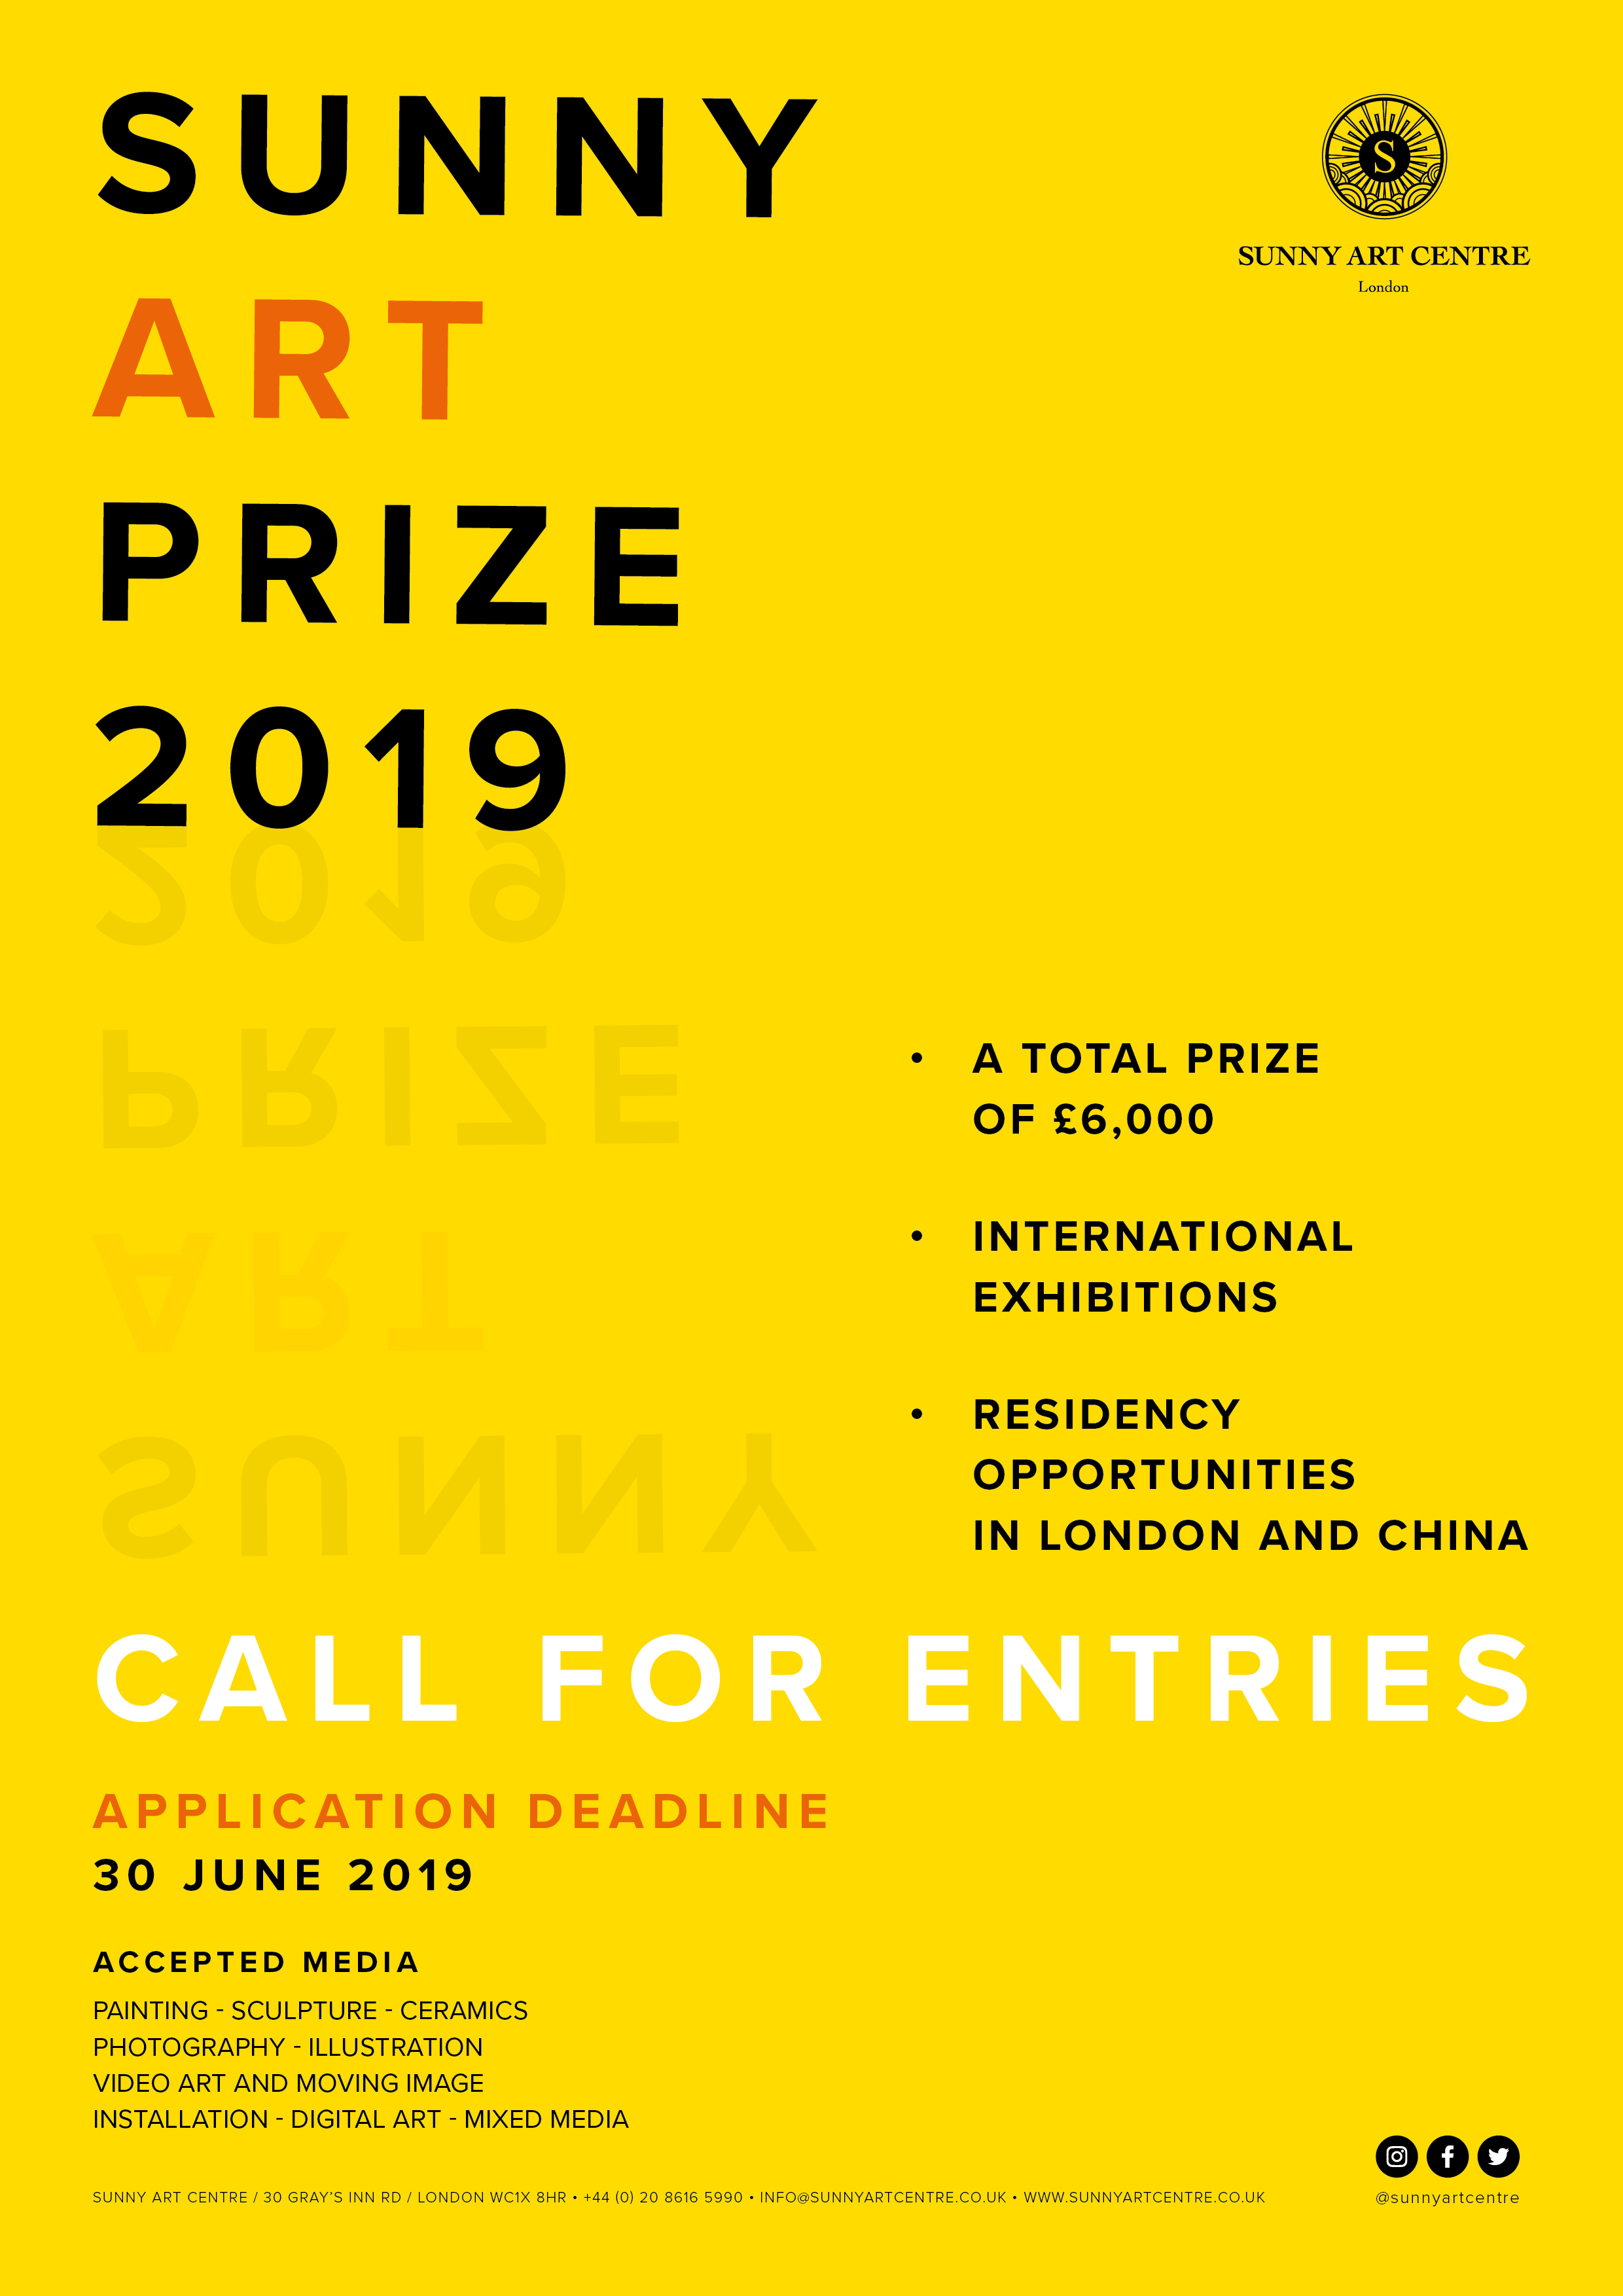 Sunny Art Prize 2019: Call For Artists by Mario Zucchelli - Creative Work